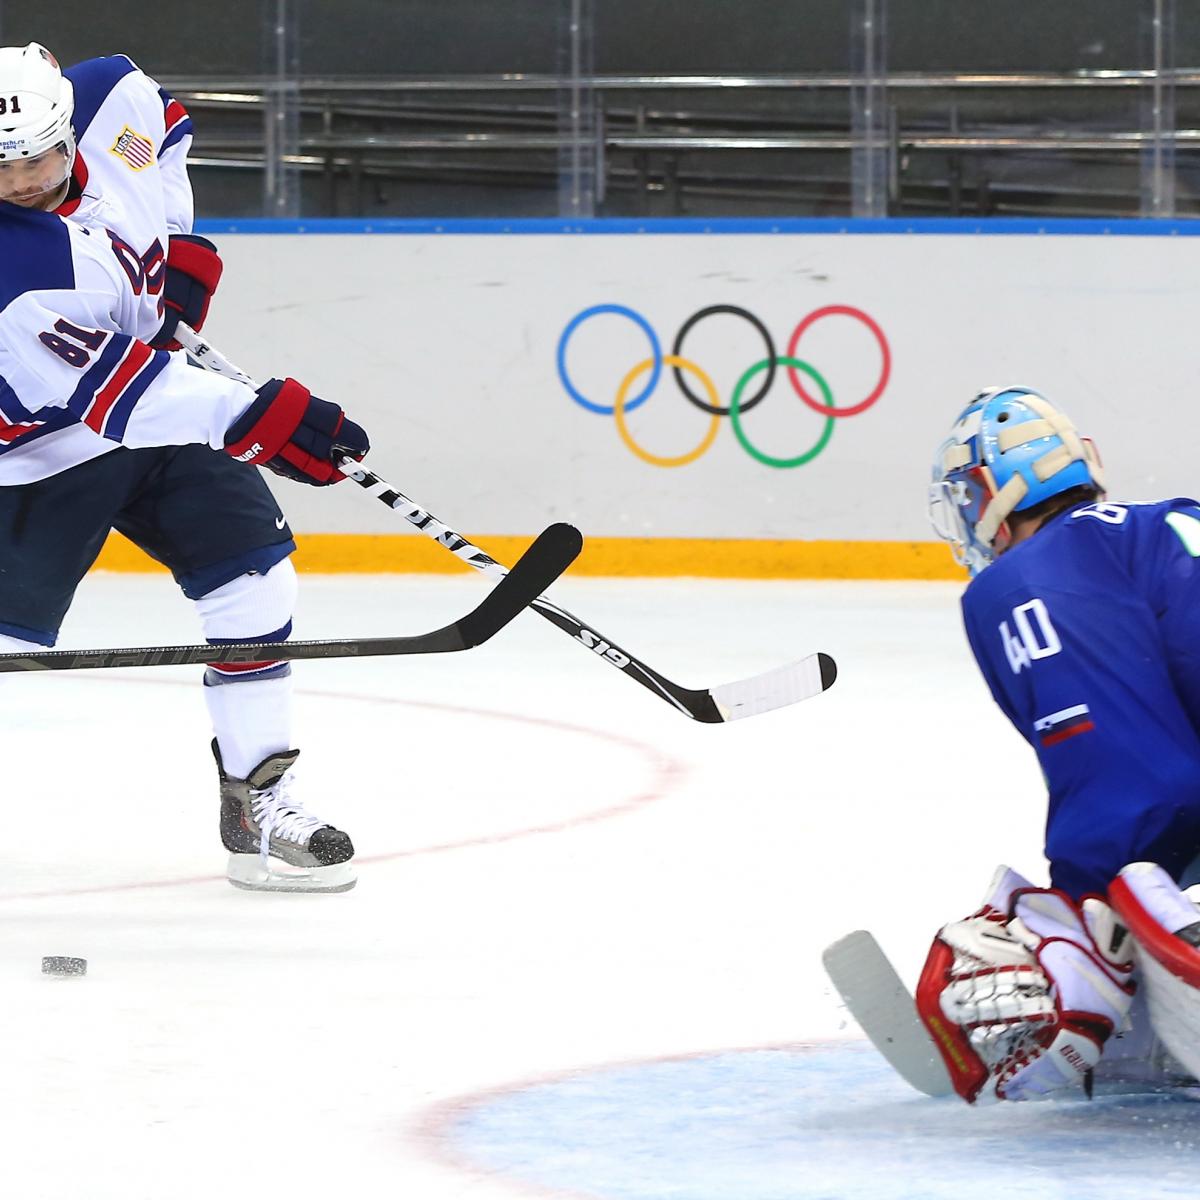 Mens Olympic Hockey Schedule 2014: Viewing Guide for Quarterfinals | News, Scores, Highlights